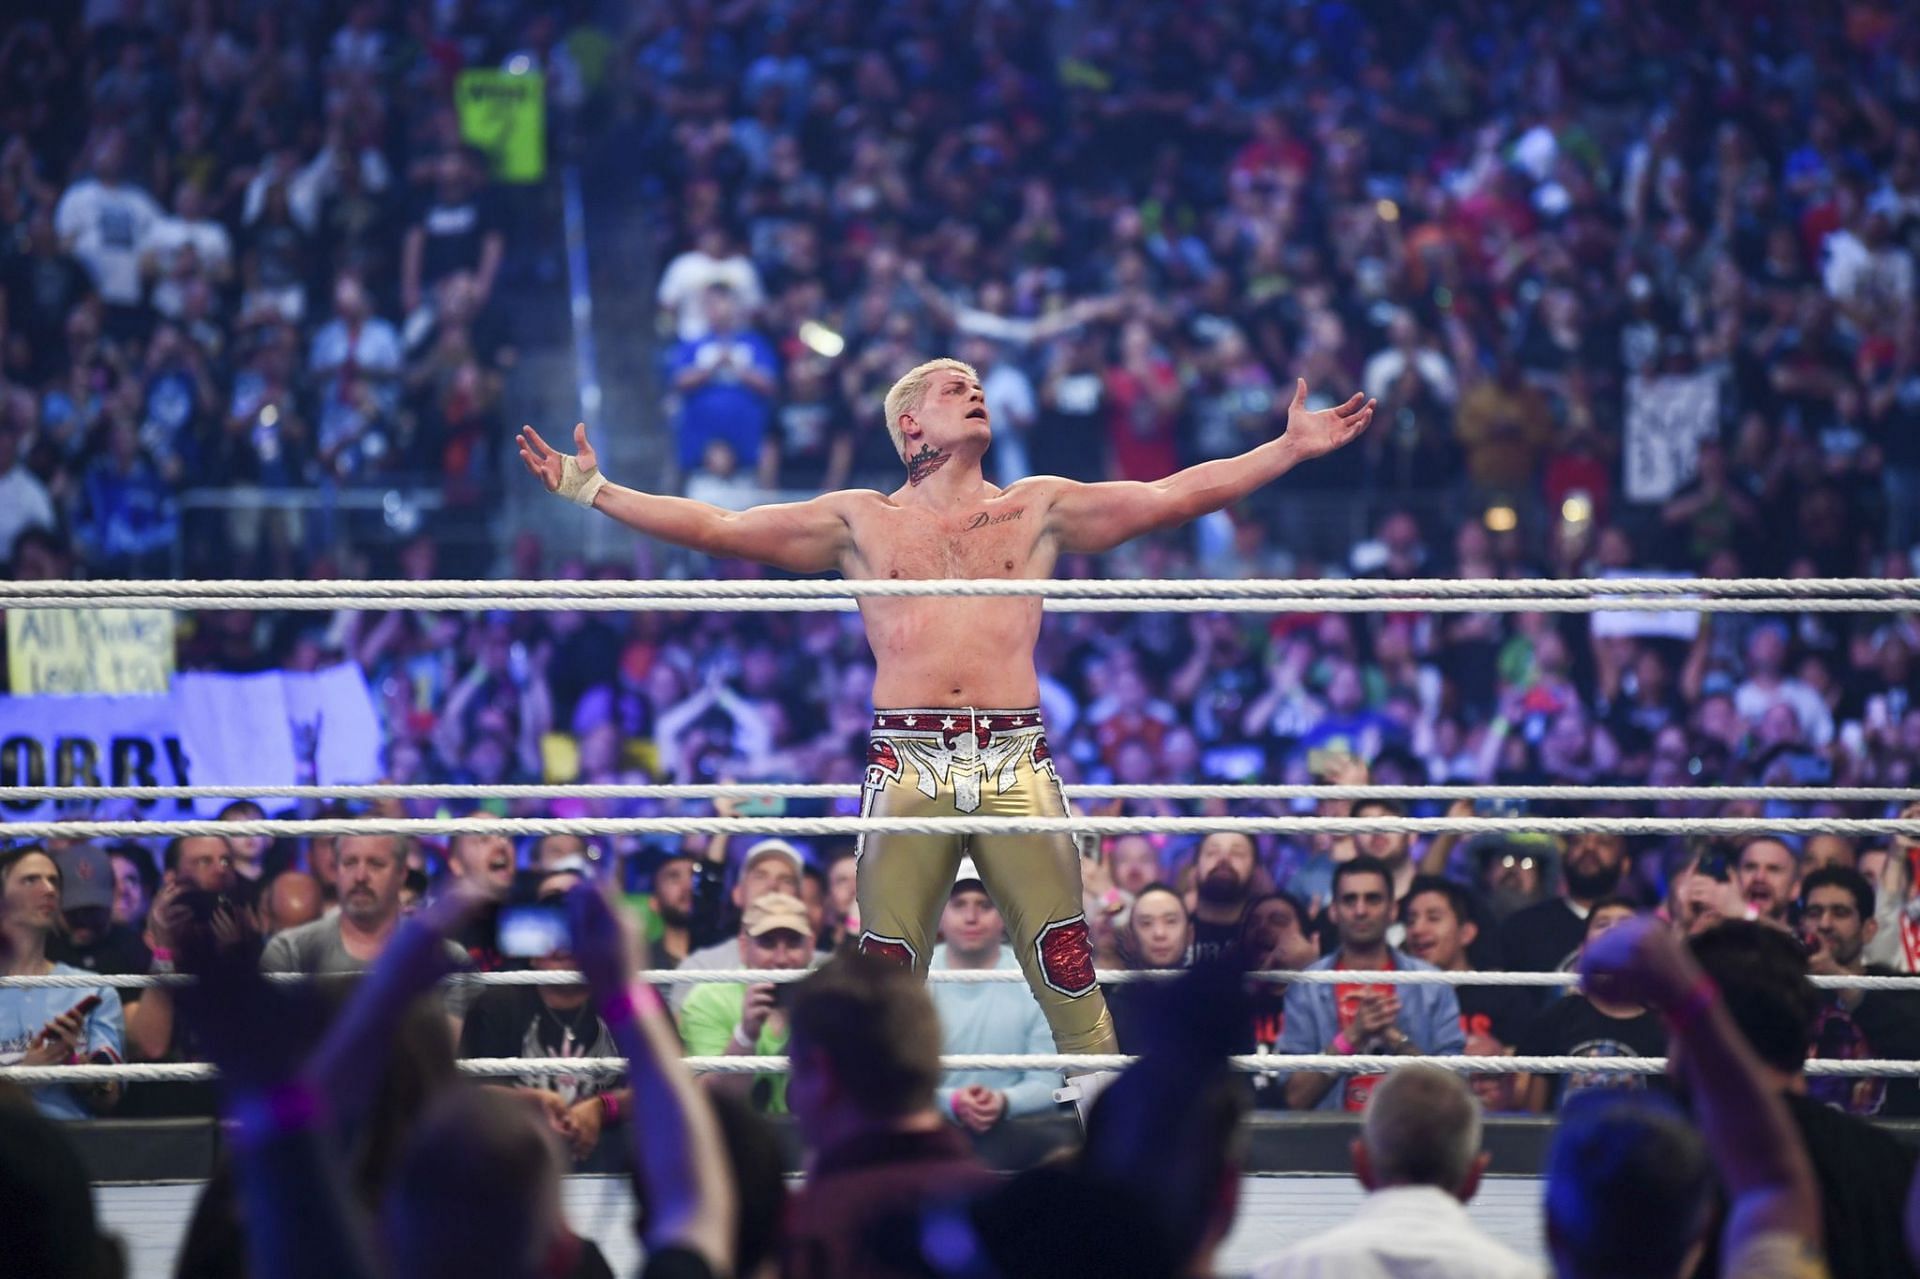 A win over Brock Lesnar would make Cody Rhodes the top guy